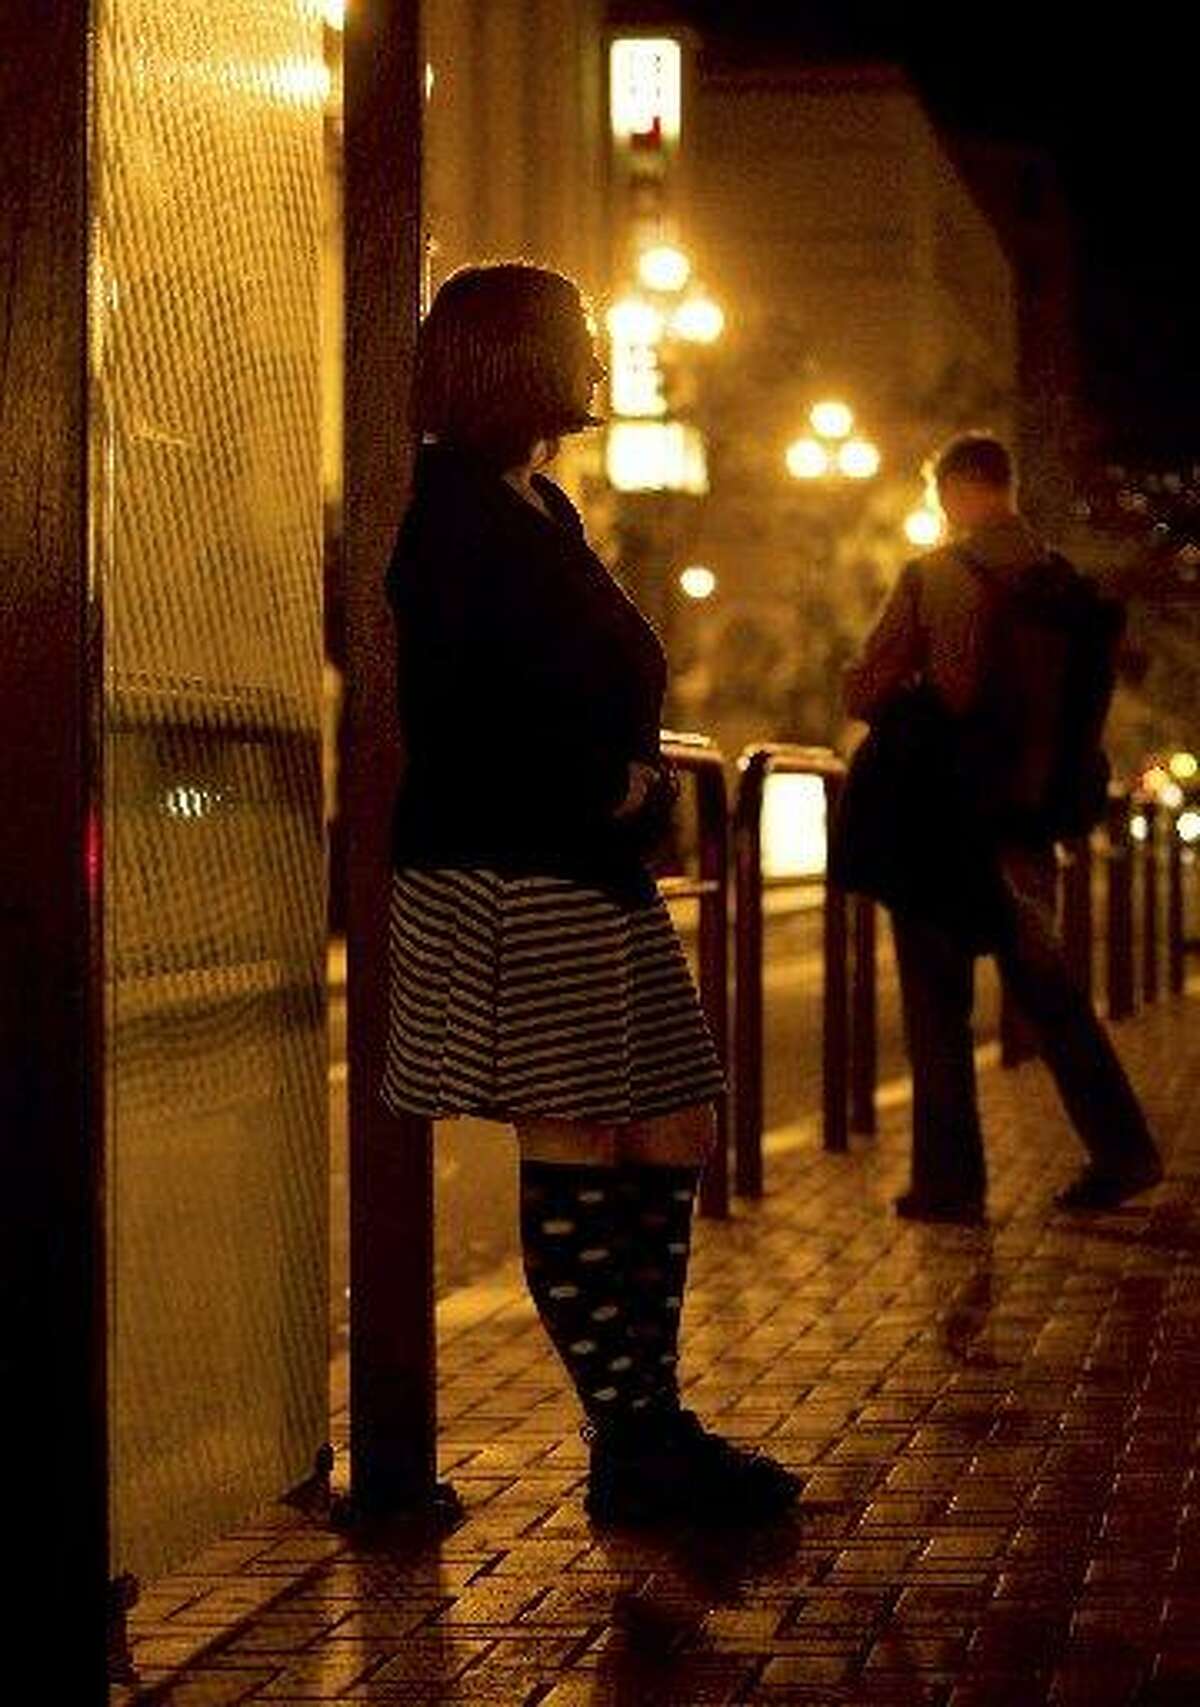 A sex worker who goes by the name “Violet” poses for a picture at a bus stop in downtown San Francisco on Thursday, Oct. 16, 2008. City law enforcement officials on Thursday said they will no longer arrest or charge sex workers for prostitution or petty drug crimes if they are victims or witnesses to violent crime.